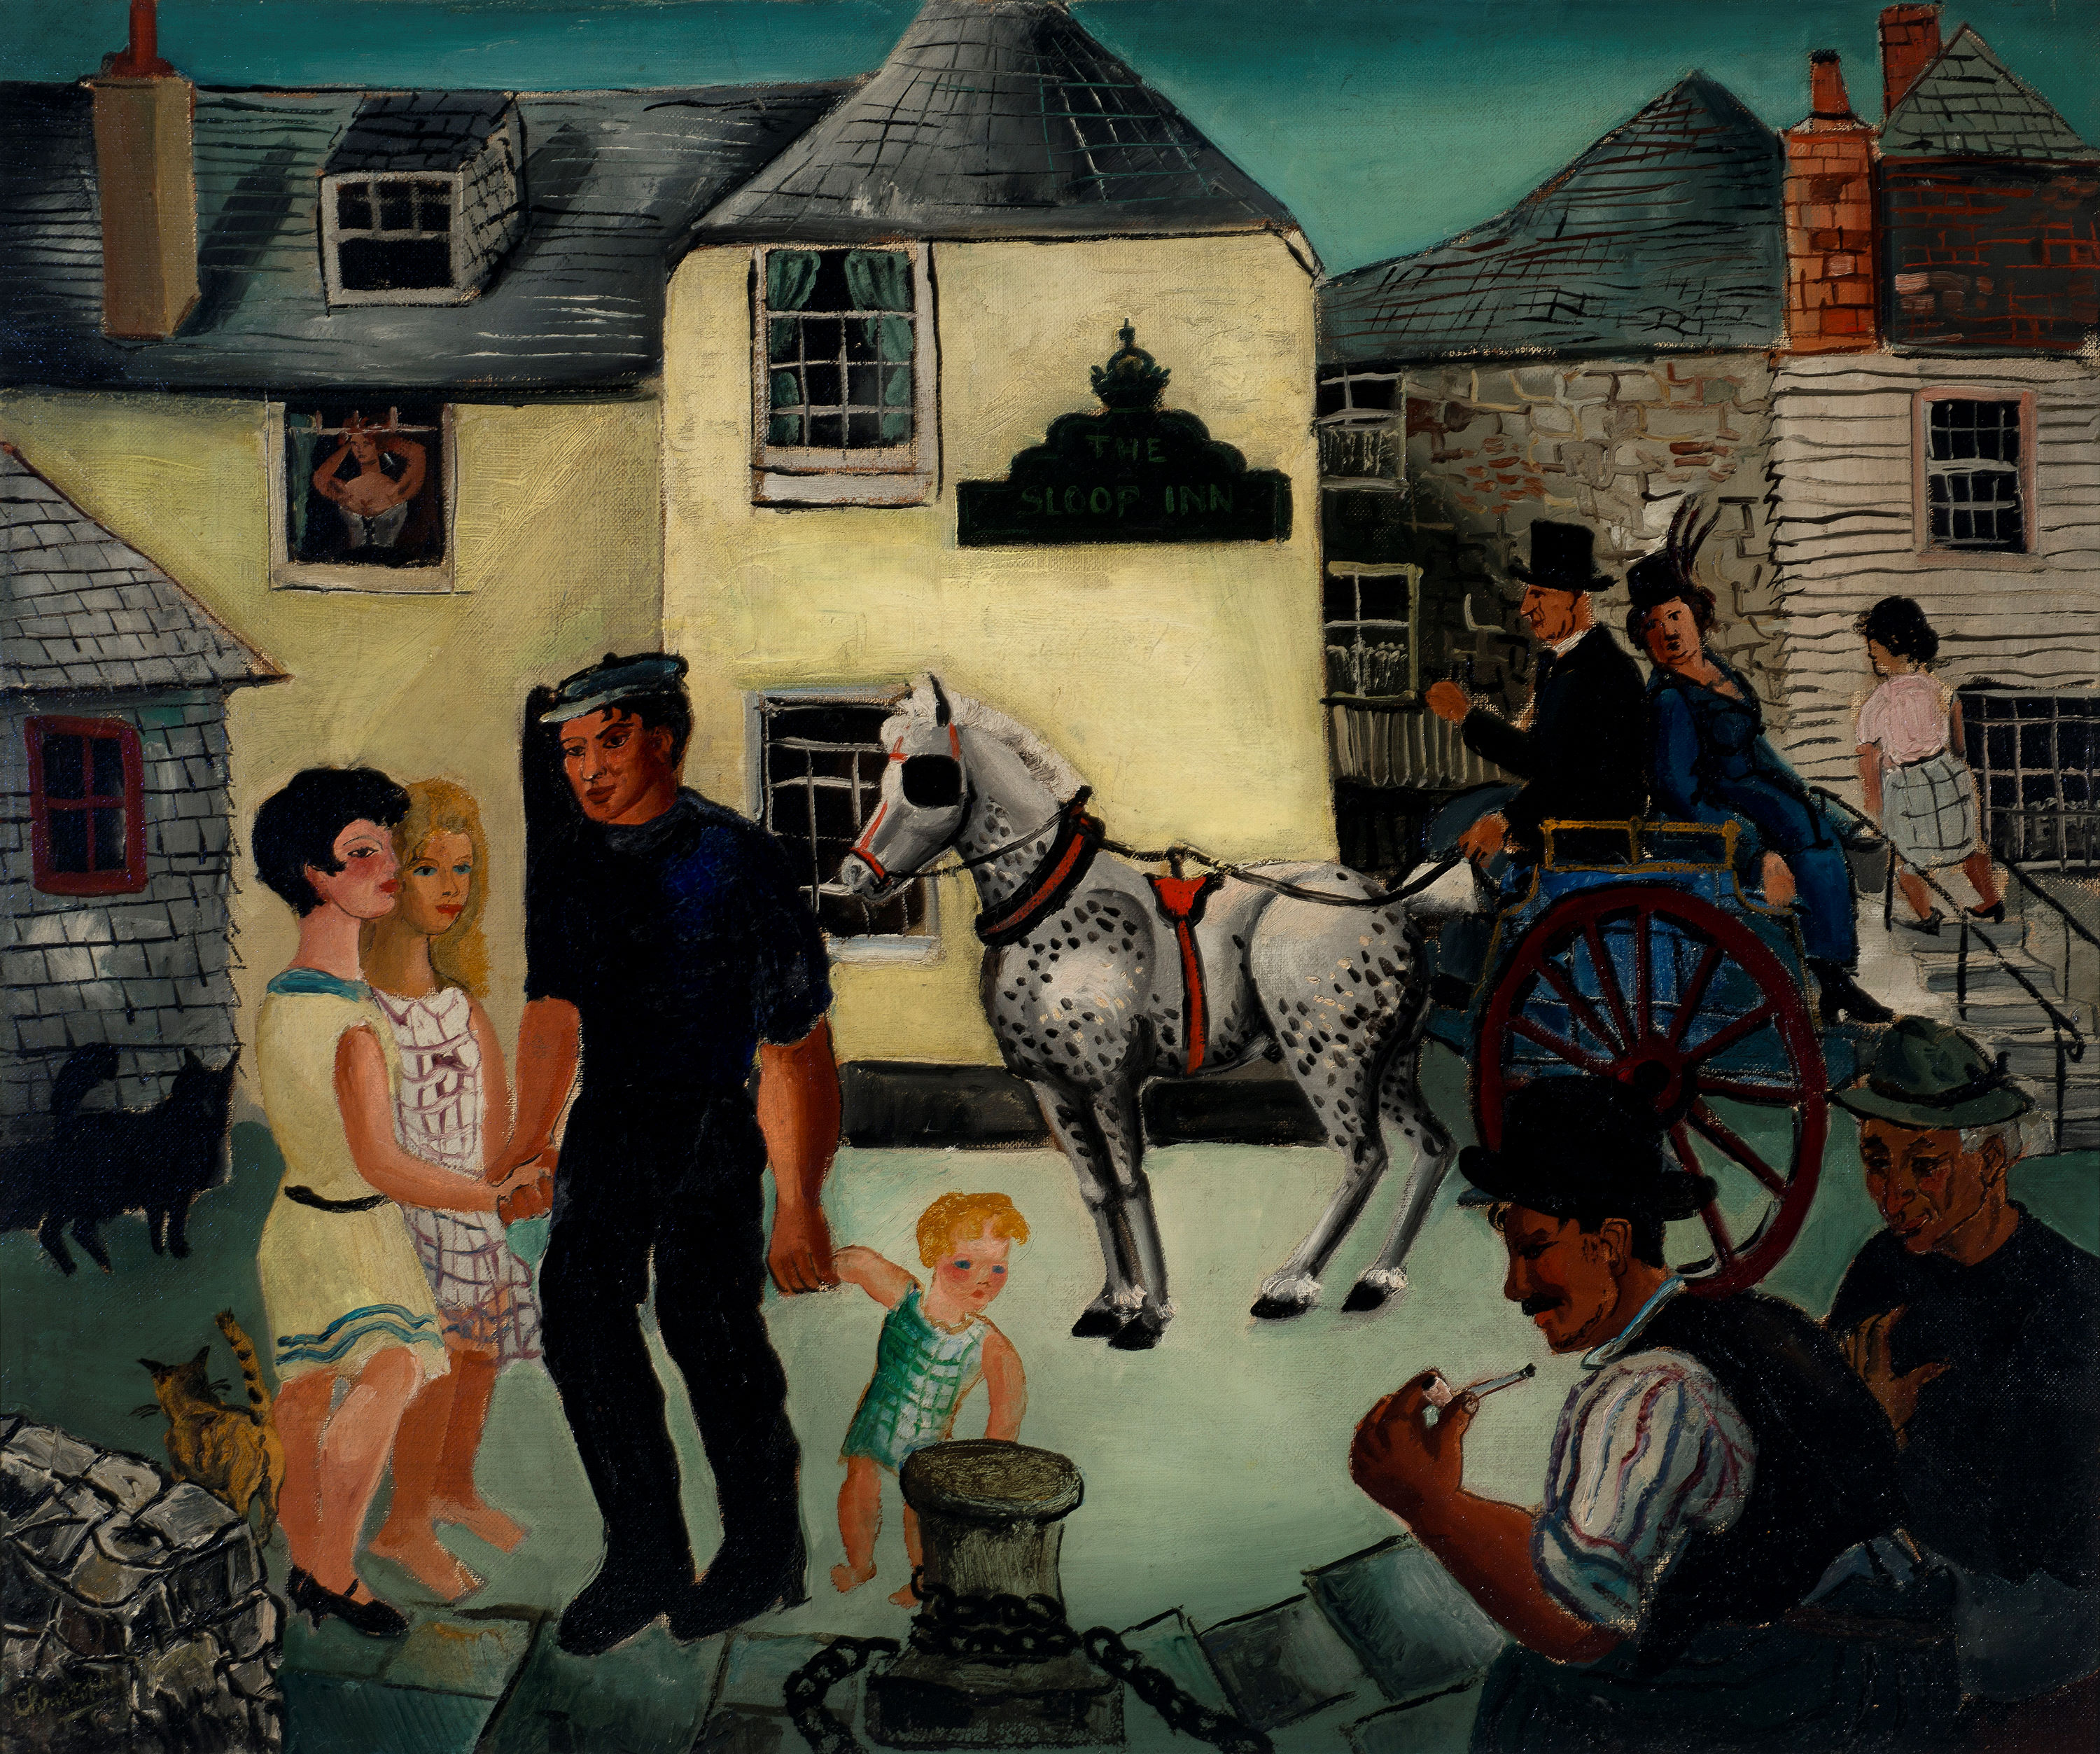 <p><strong>Christopher Wood</strong><br />
<em>The Sloop Inn, St Ives </em>1926<br />
Auckland Art Gallery Toi o Tāmaki&nbsp;<br />
gift of Lucy Wertheim, 1948</p>